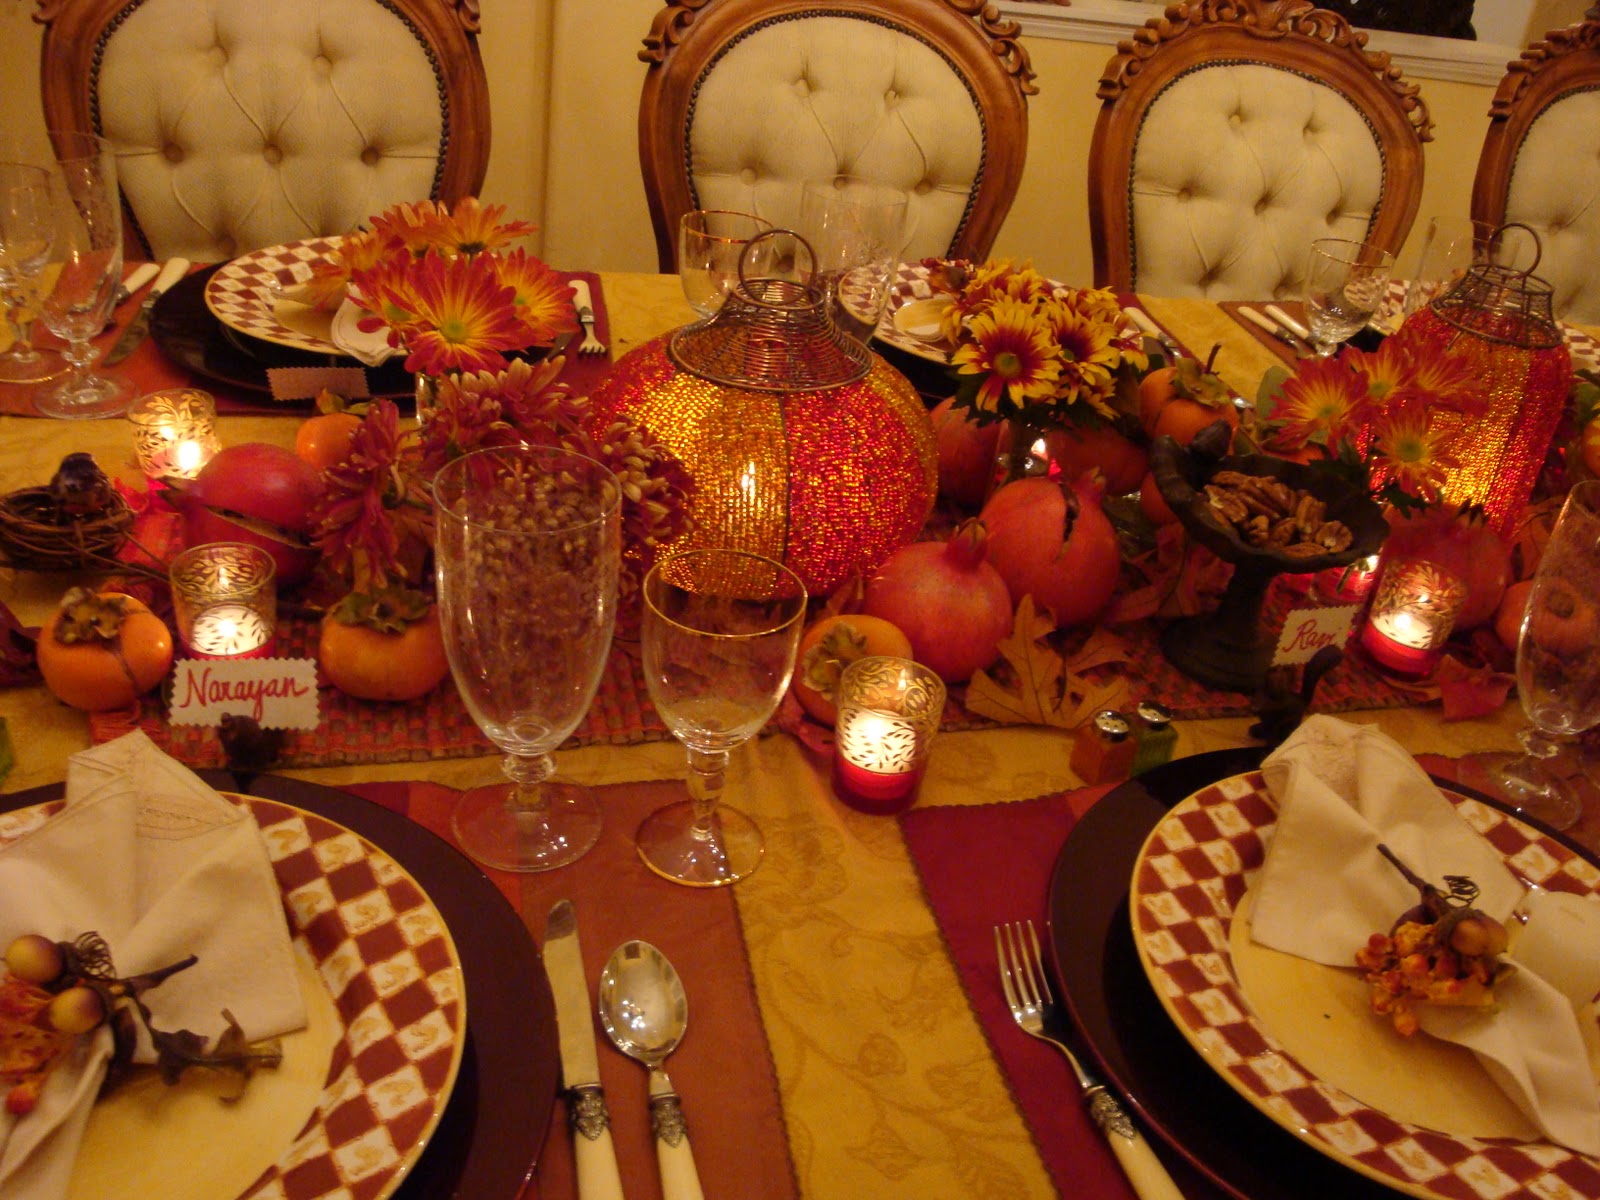 Entertaining From an Ethnic Indian Kitchen: My Thanksgiving Table